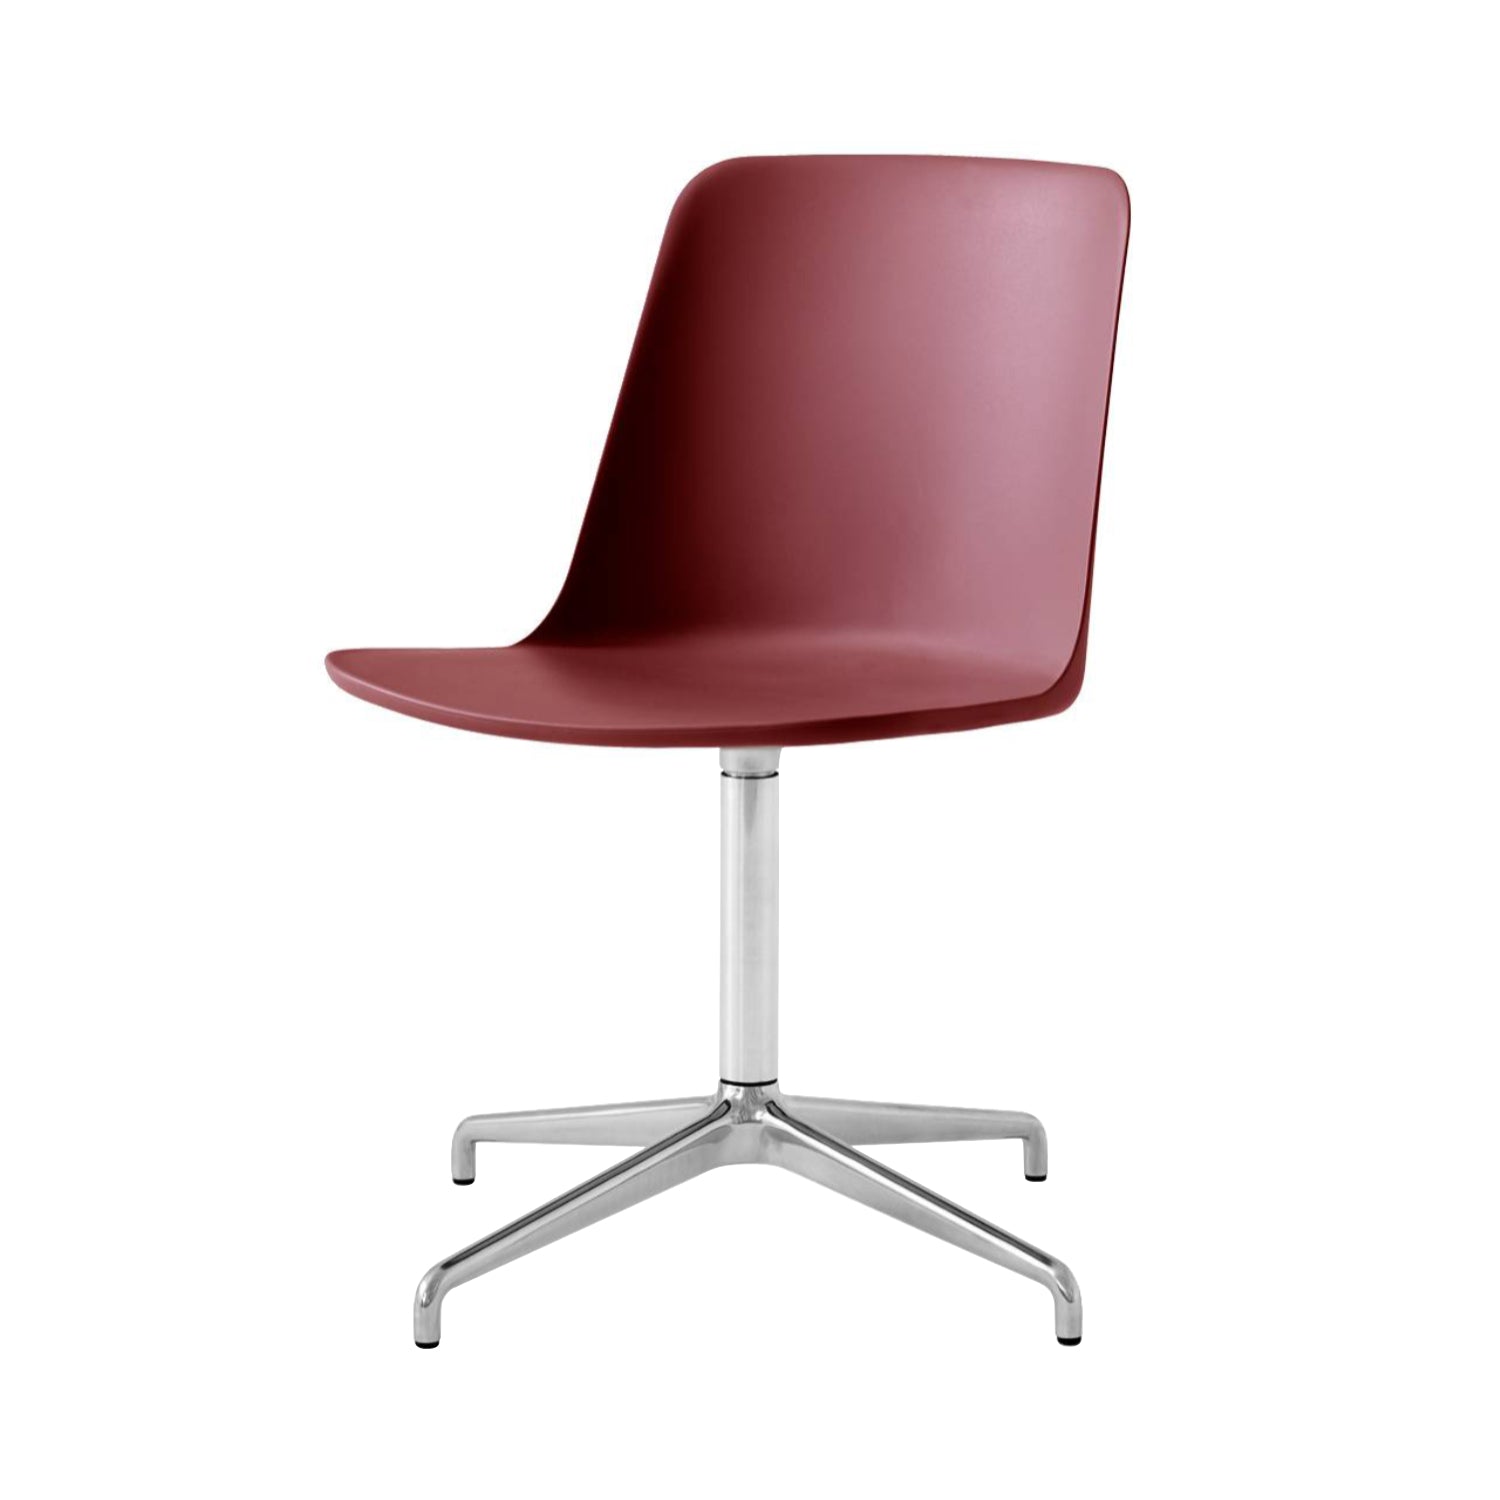 Rely Chair HW16: Red Brown + Polished Aluminum